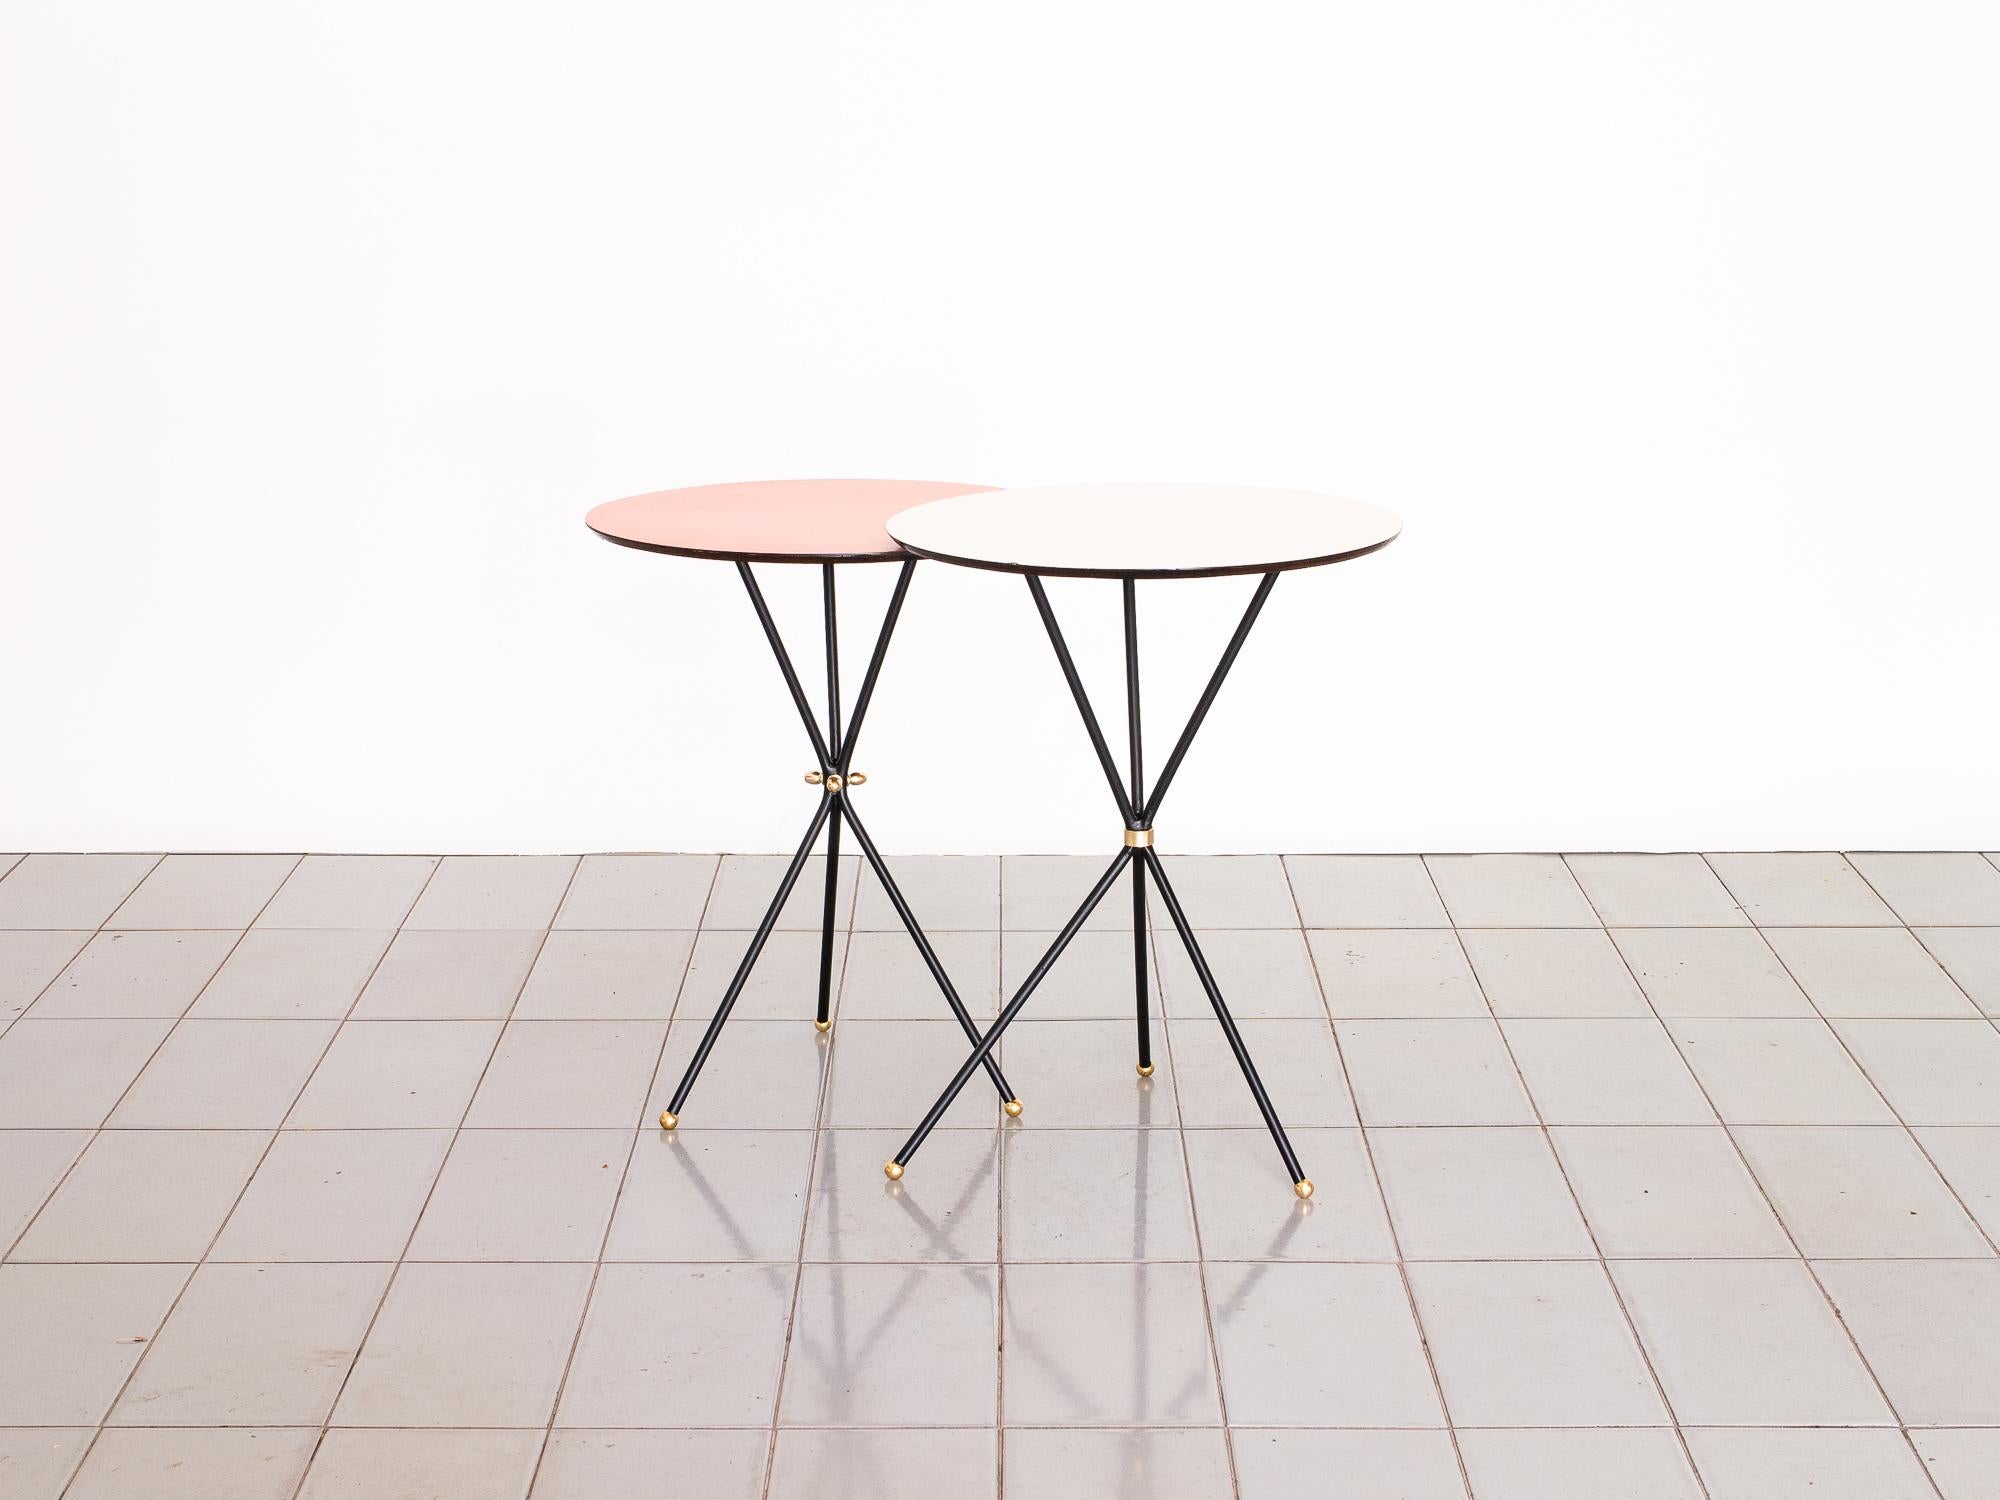 Brazilian 1950s Duo of Tripod Side Tables in Iron, Brass and Formica, Brazil Modern